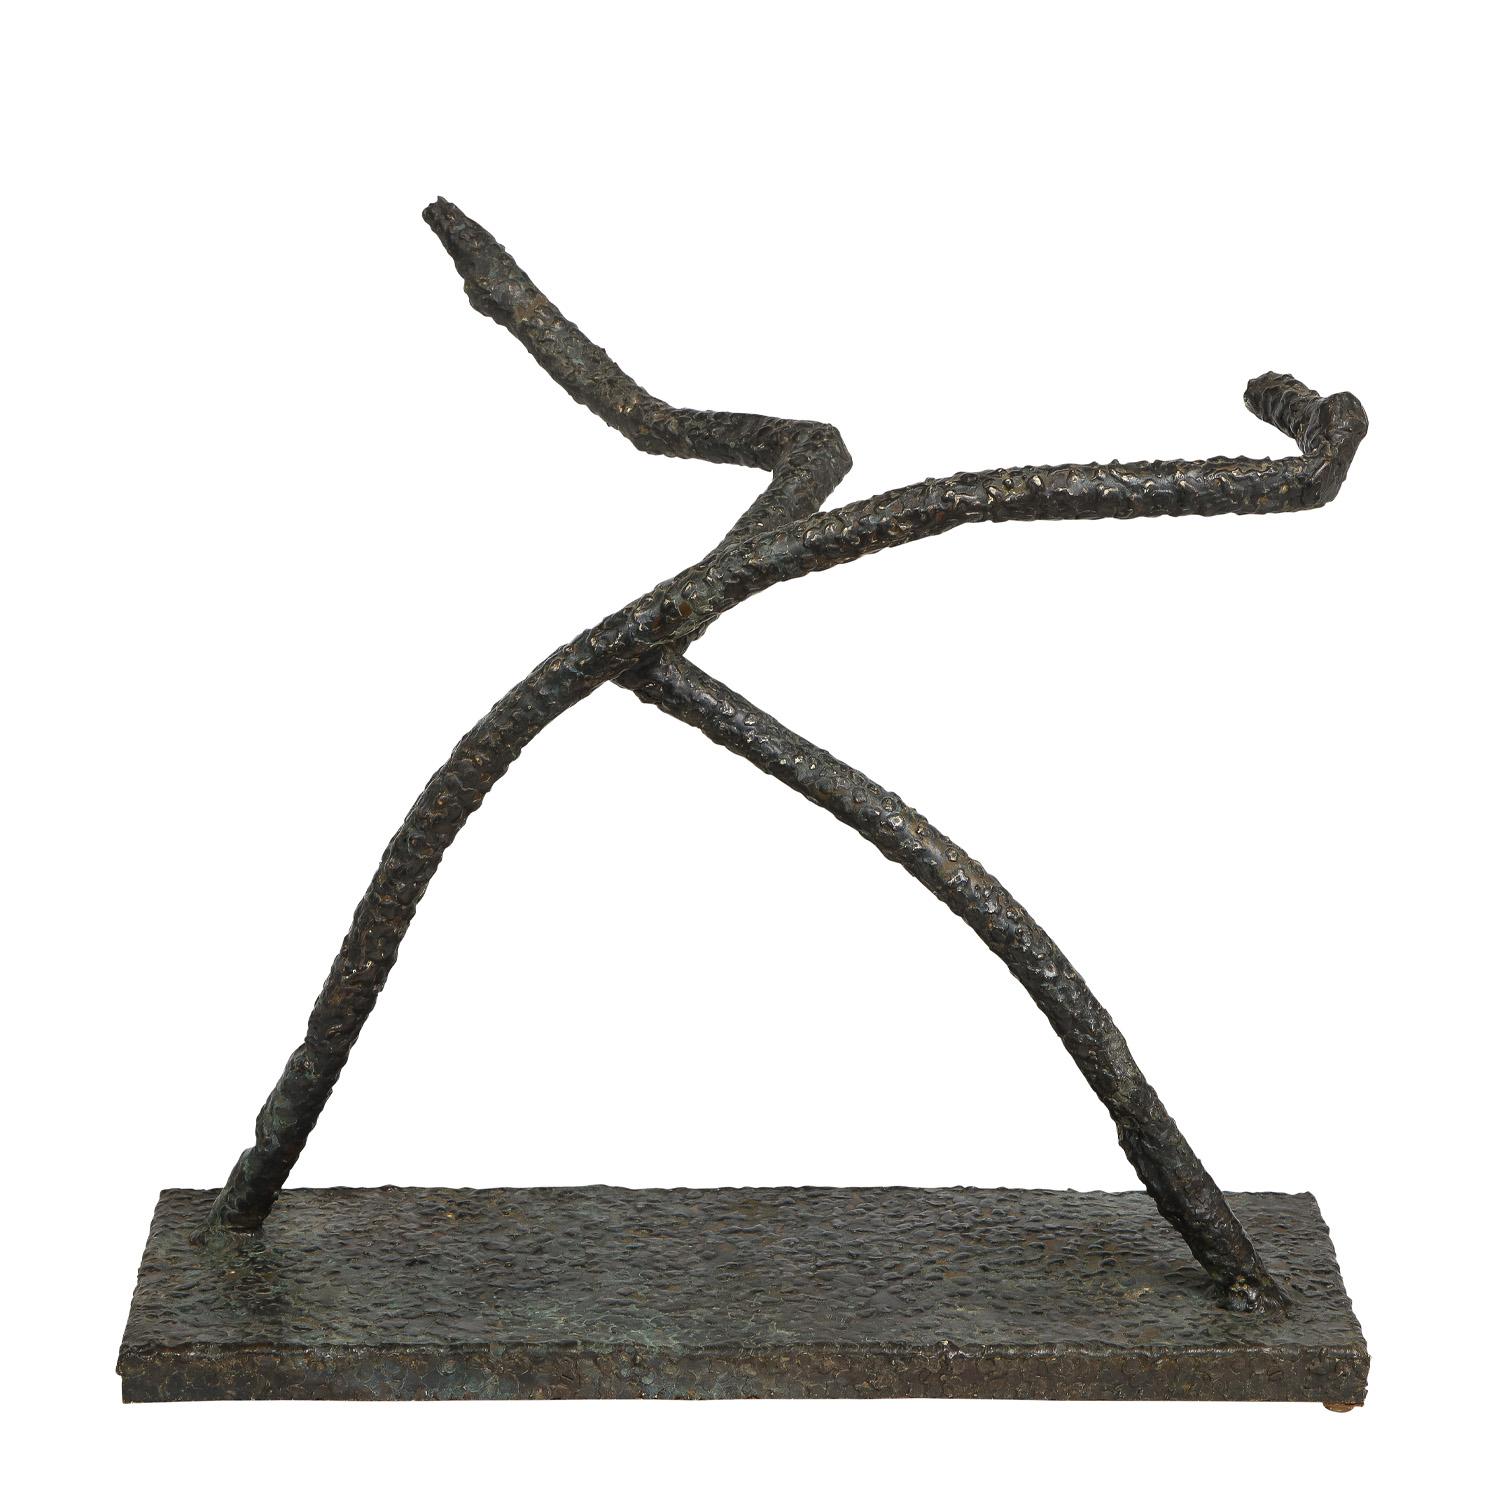 One-of-a-kind sculpture, The Runner, in hand-brazed and textured bronze by Philip & Kelvin LaVerne, American 1970's (signed 